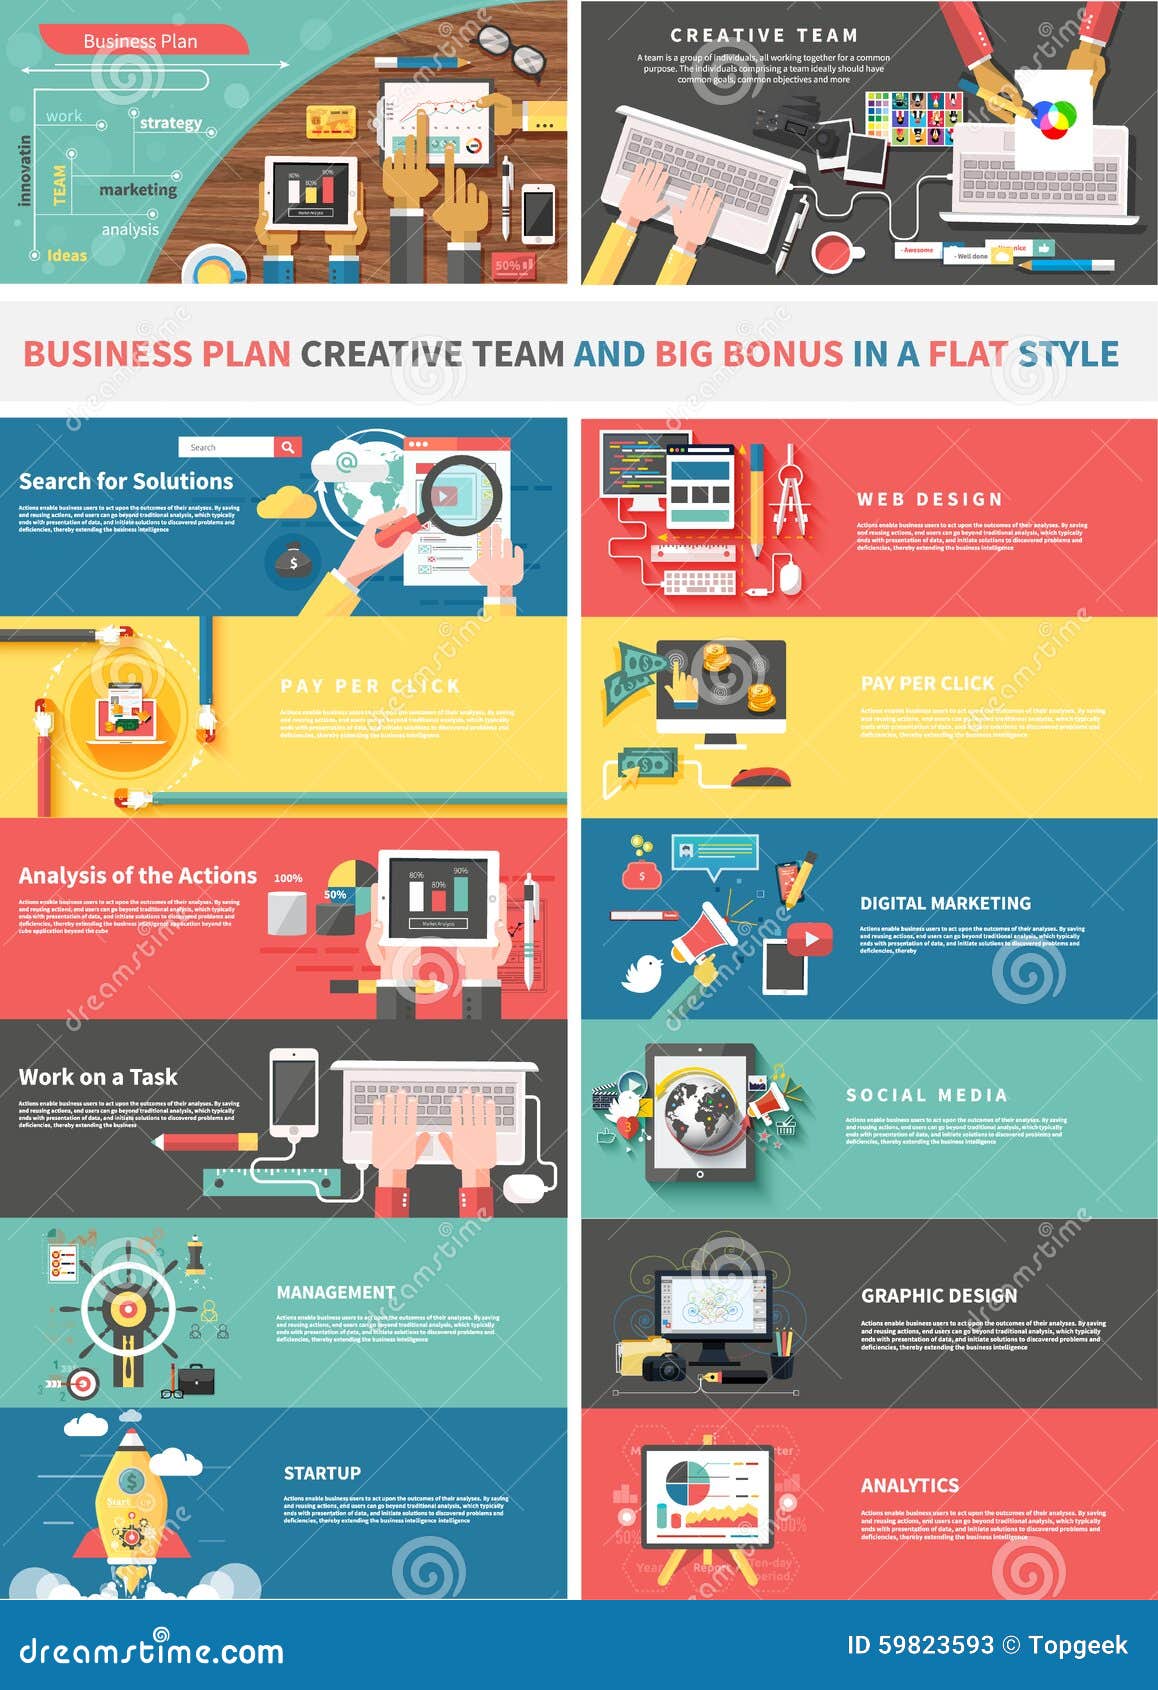 How to Create a Business Plan for a Website